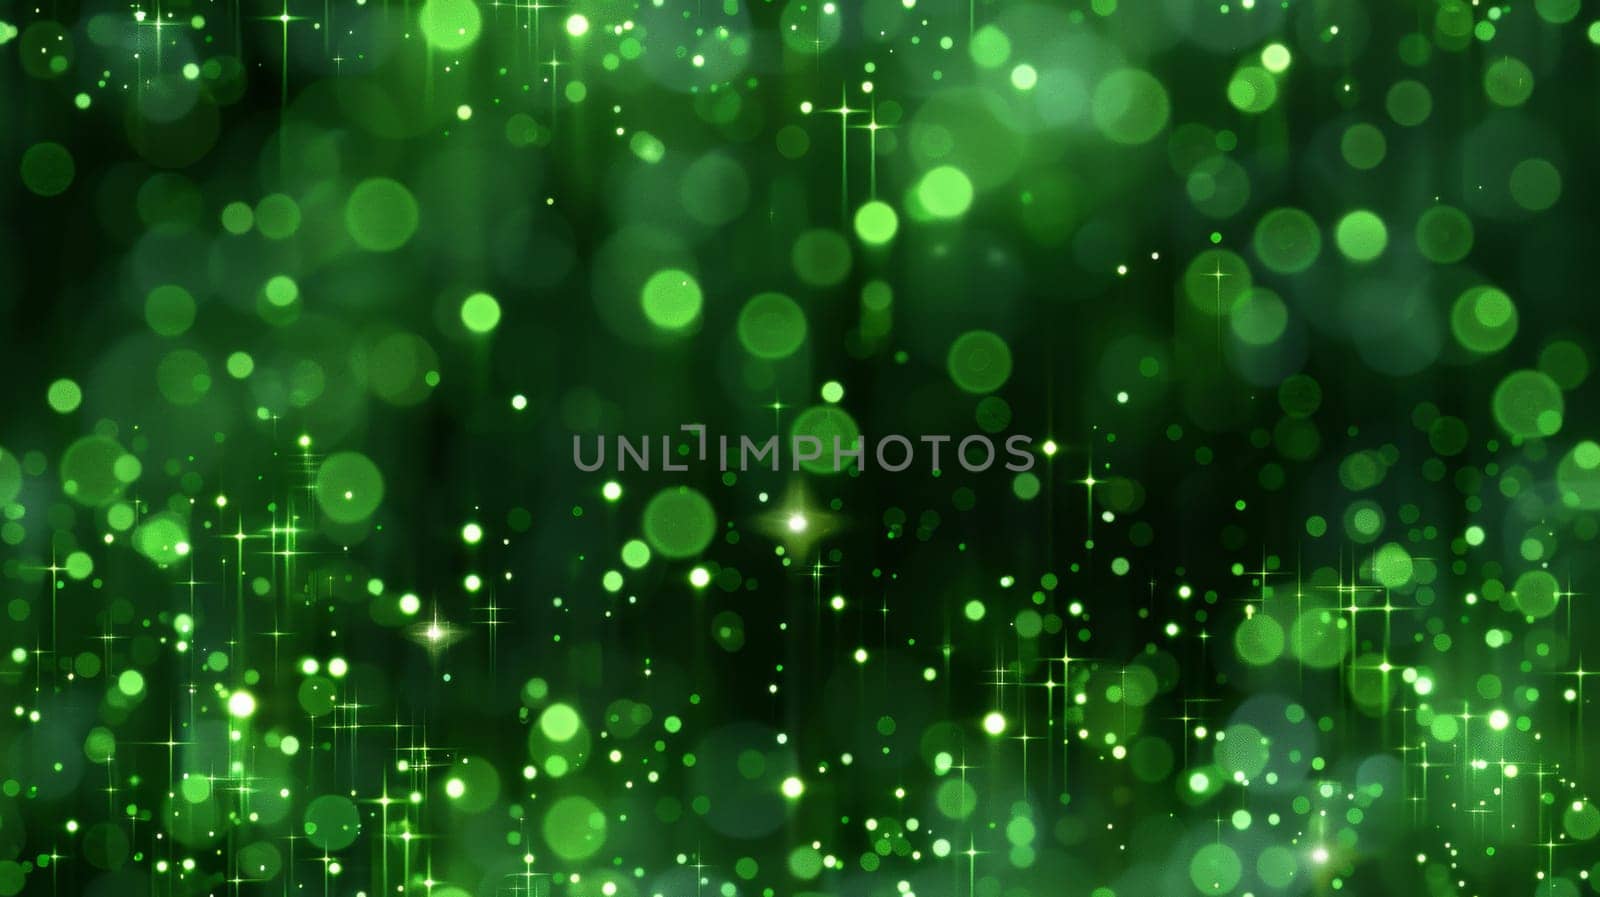 A green sustainable abstract background with blurred falling bright dots.